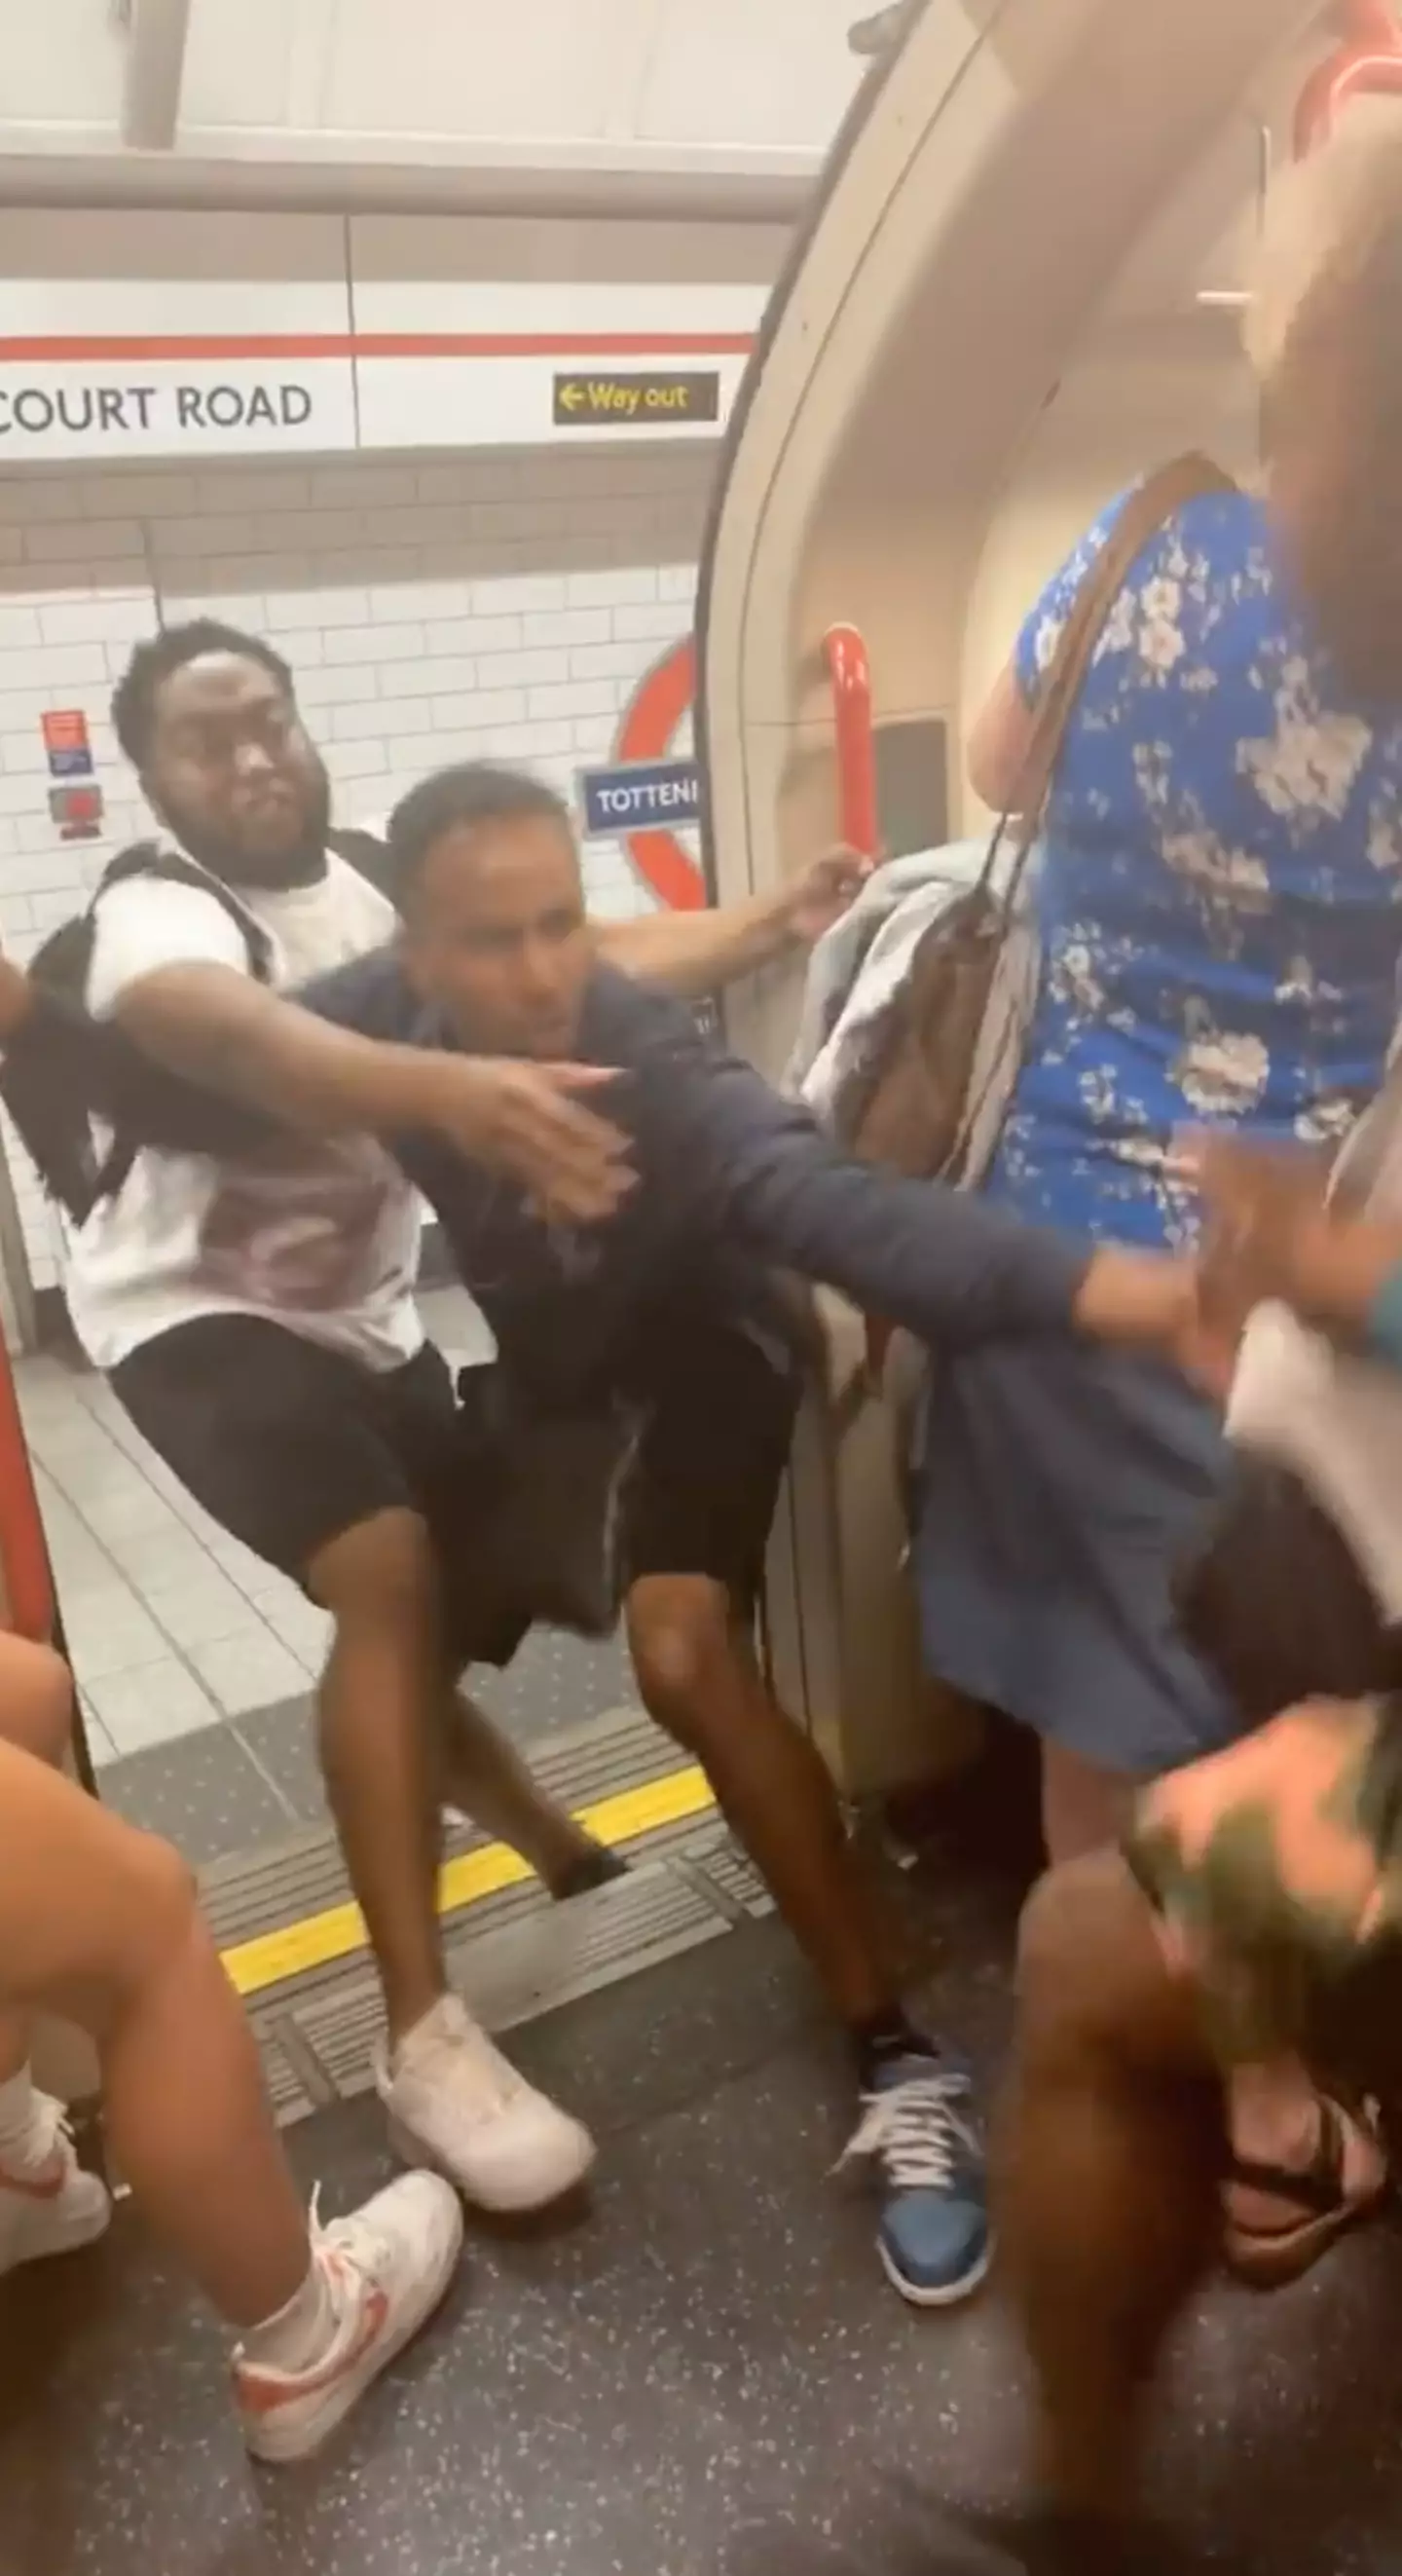 One of the men attempted to pull the man off the packed tube carriage.